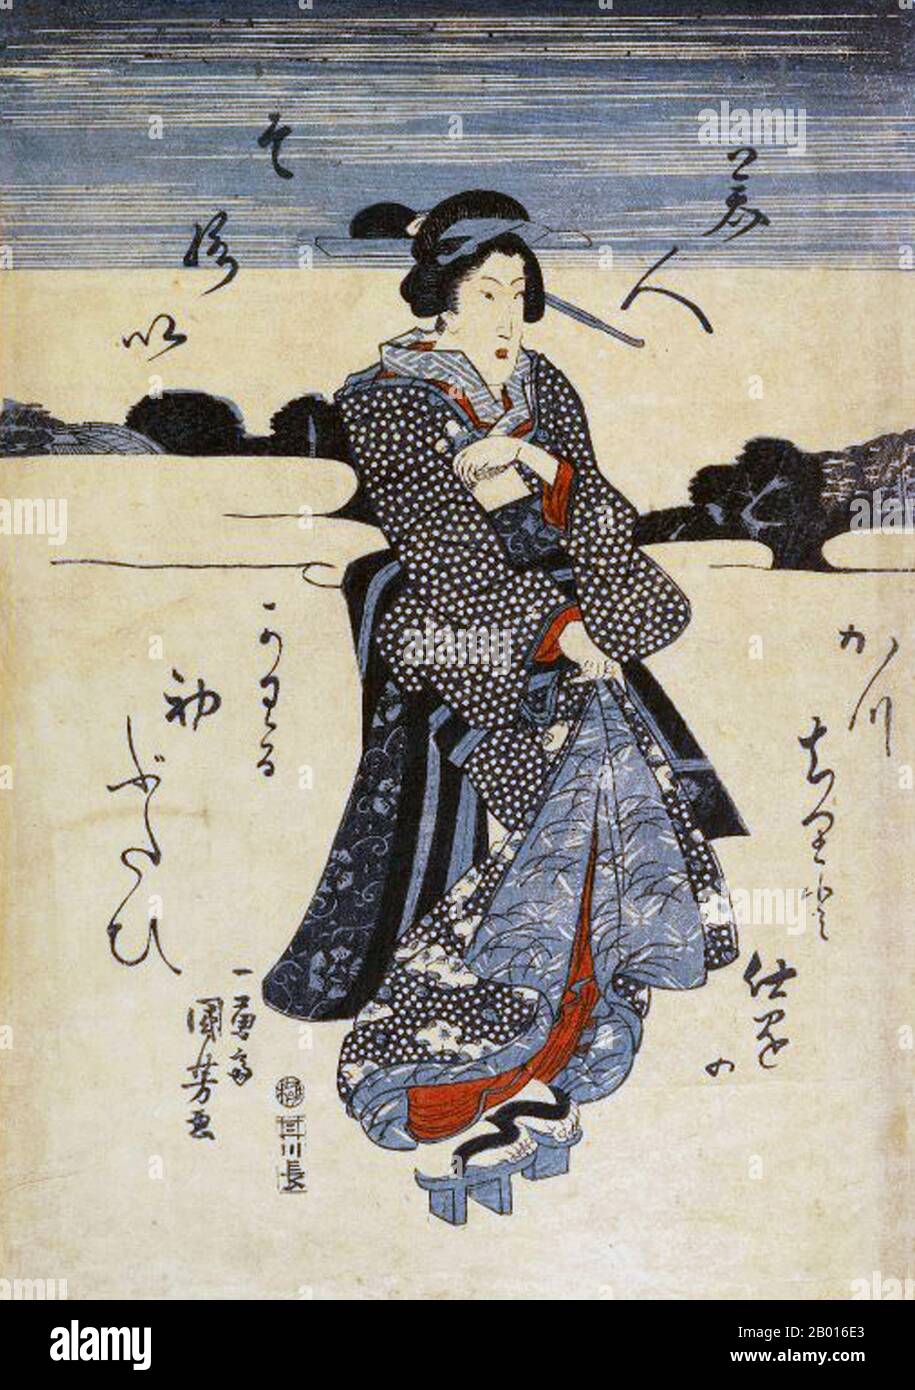 Japan: 'Series of Beauties'. Ukiyo-e woodblock print by Utagawa Kuniyoshi (1 January 1798 - 14 April 1861). c. 1834.  Utagawa Kuniyoshi was one of the last great masters of the Japanese ukiyo-e style of woodblock prints and painting. He is associated with the Utagawa school. The range of Kuniyoshi's preferred subjects included many genres: landscapes, beautiful women, Kabuki actors, cats, and mythical animals. He is known for depictions of the battles of samurai and legendary heroes. His artwork was affected by Western influences in landscape painting and caricature. Stock Photo